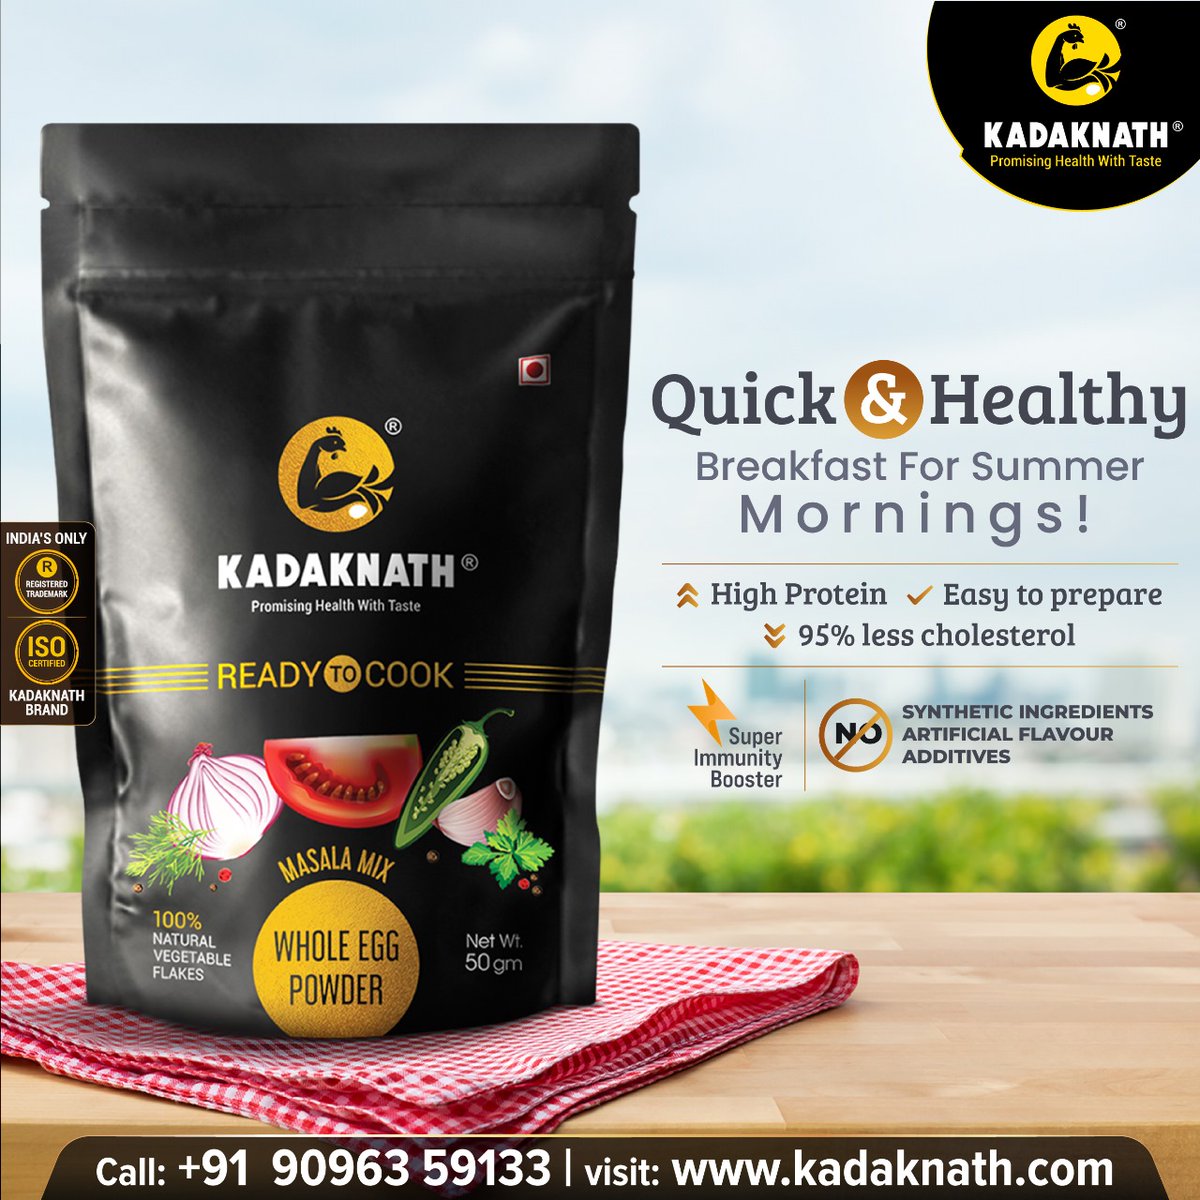 Make your breakfast quick & easy way.
Buy Kadaknath Ready-To-Cook Omelette Powder Here: buykadaknath.com/.../kadaknath-…...
#kadaknath #kadaknatheggs #kadaknatheggpowder #eggs #omelette #readytocook #readytocookomeletpowder #readytocookmeal #readytocookfood